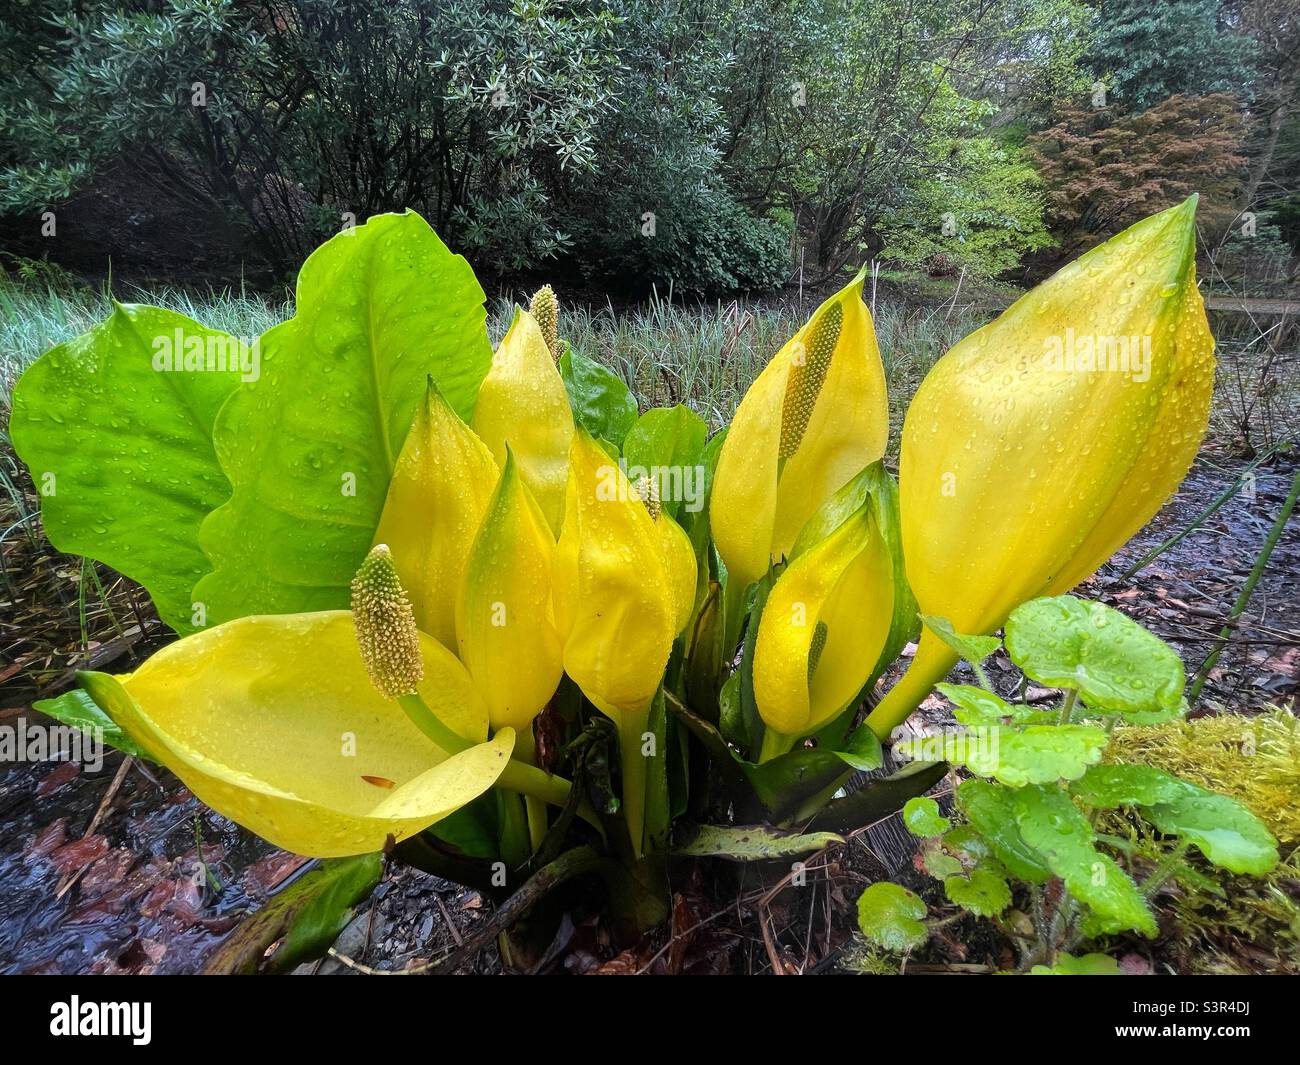 Skunk cabbage ( Lysichiton americanus ) growing near an ornamental pond in North Wales, April. Stock Photo